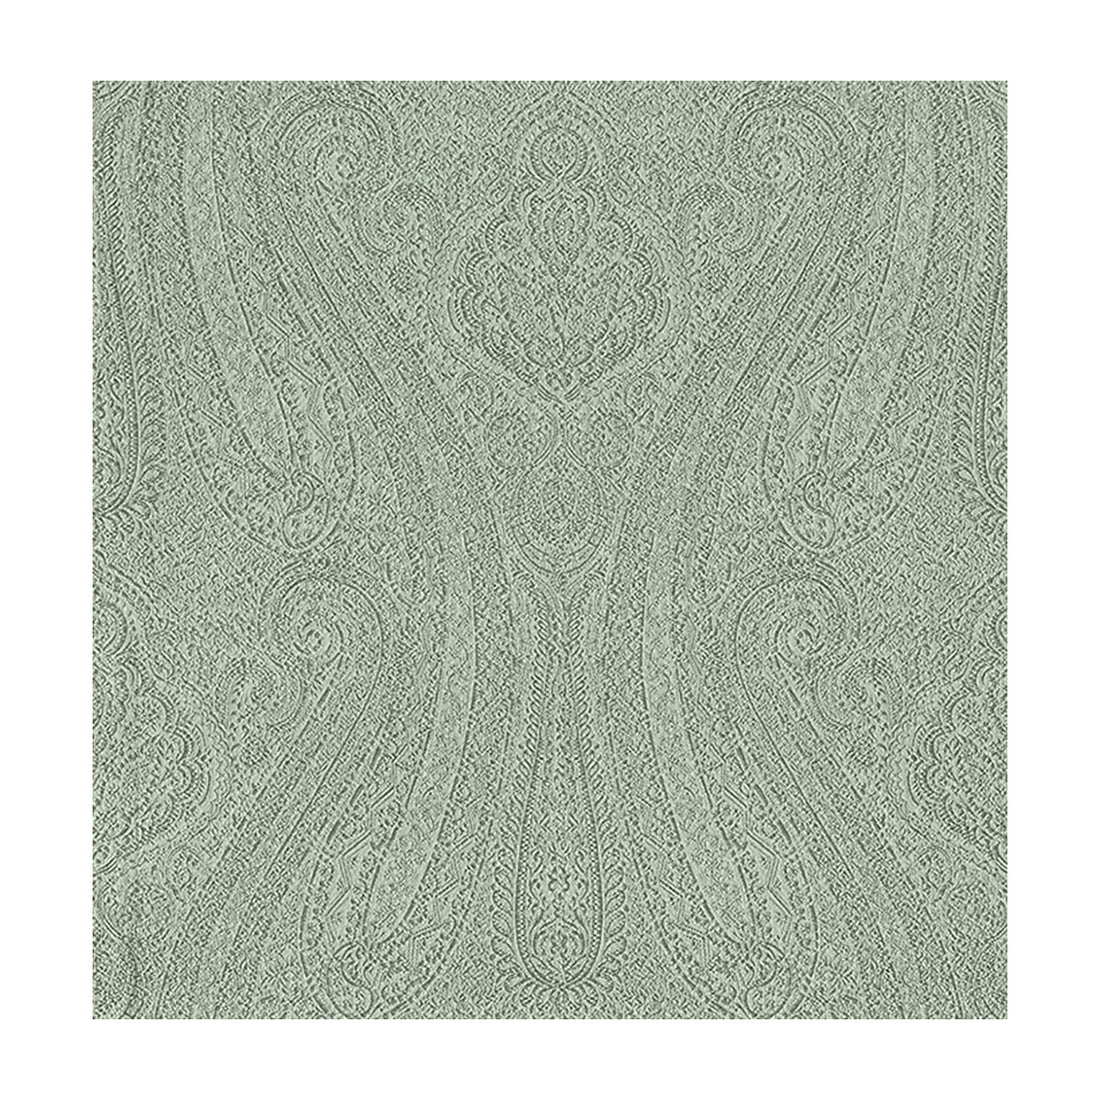 Livia fabric in mineral color - pattern 34127.1516.0 - by Kravet Design in the Candice Olson collection